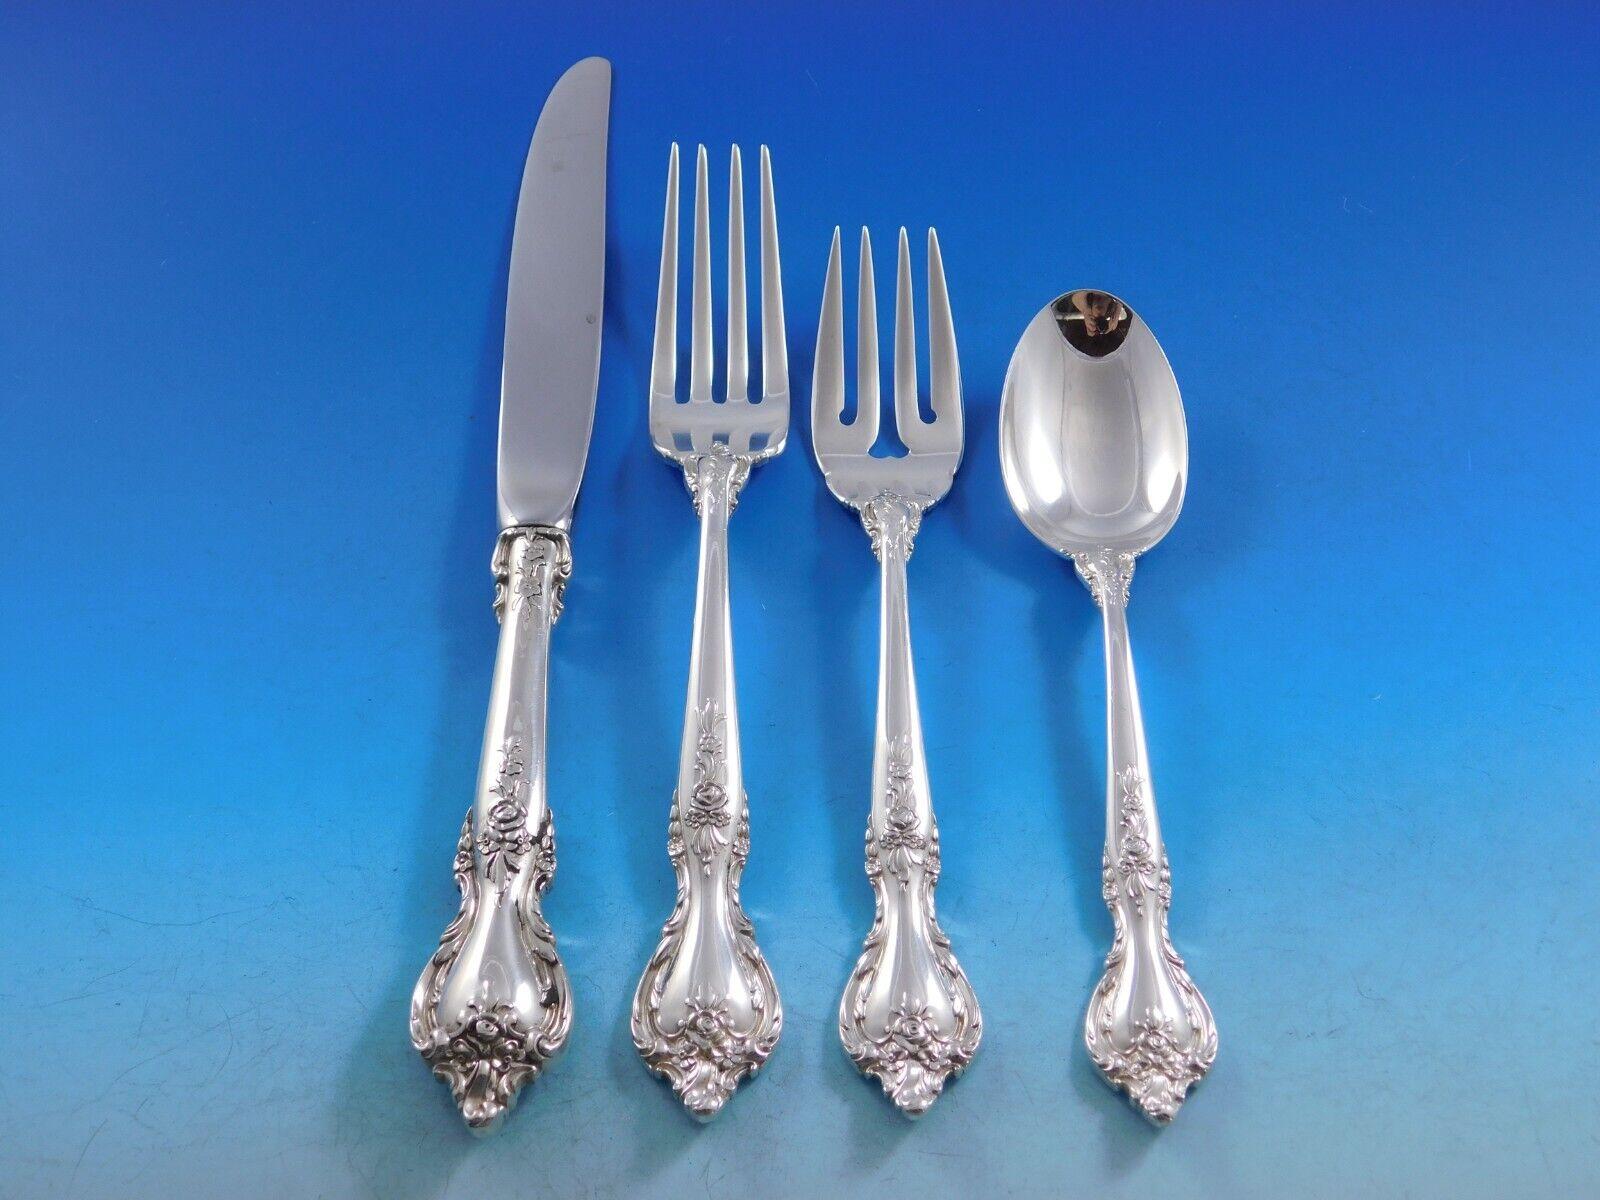 Monumental Delacourt by Lunt Sterling Silver Flatware set - 104 pieces. This set includes:

12 Knives, 9 1/8